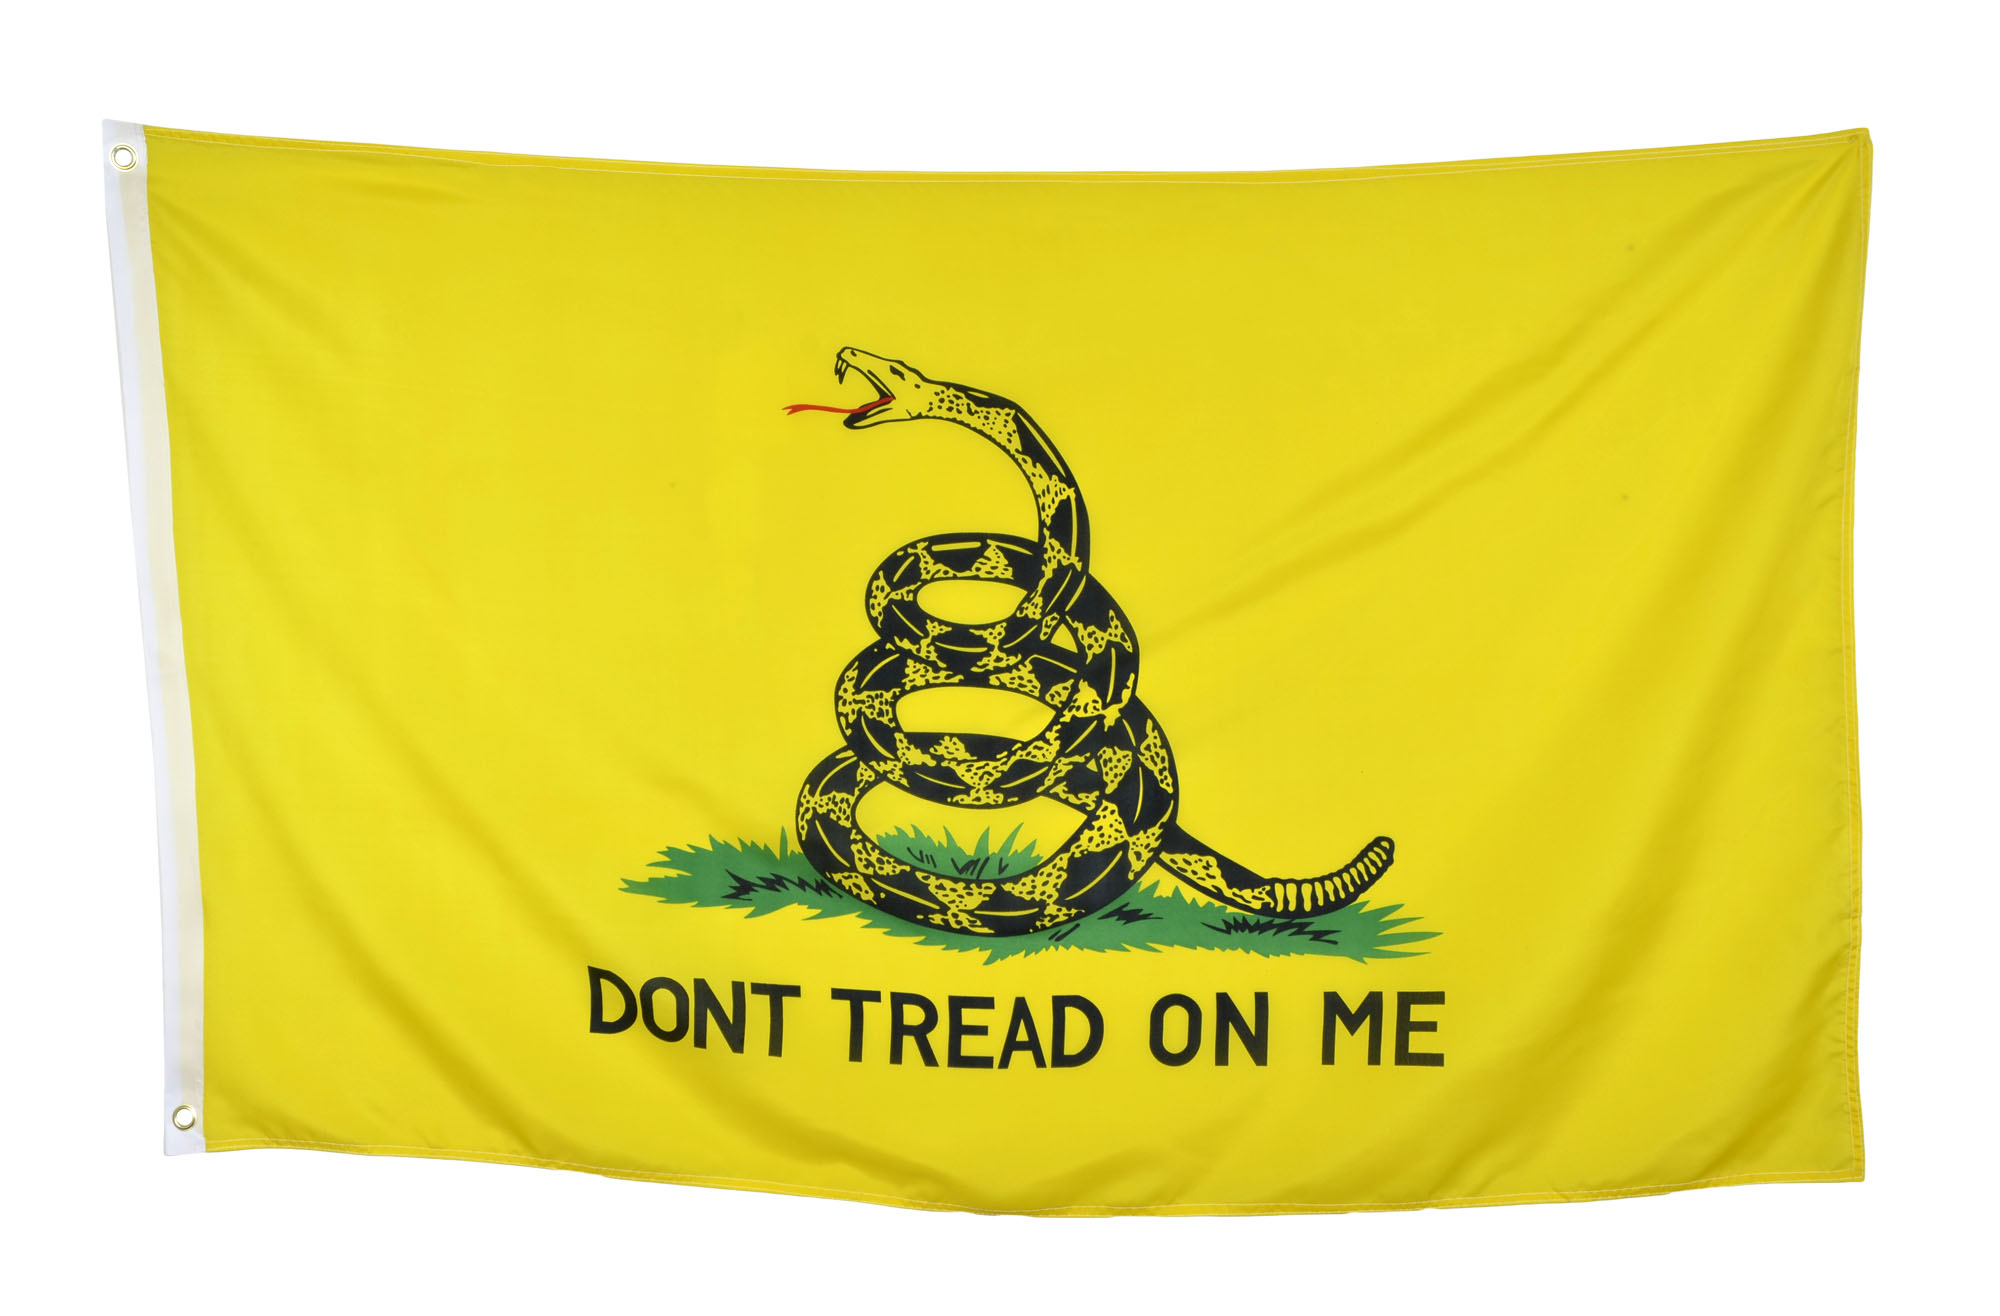 Shop72 - Dont Tread on Me Yellow (Gadsden) Flag - 3x5 Foot Poly